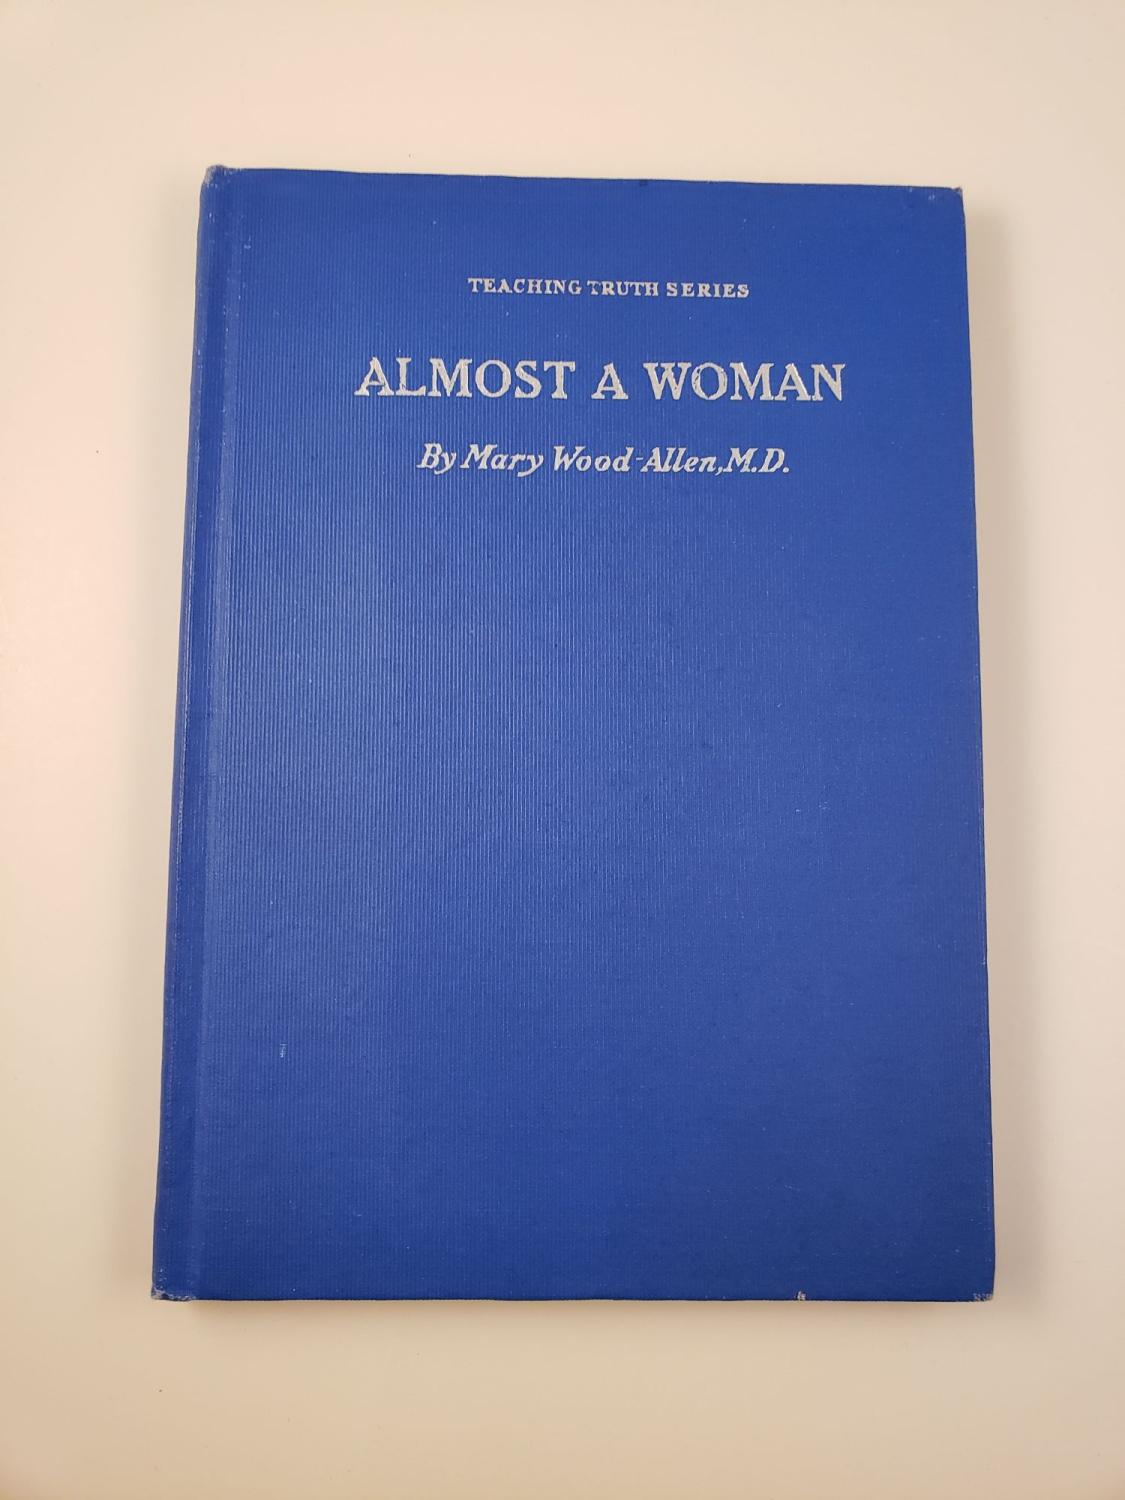 Almost A Woman - Wood, Allen Mary, M.D.